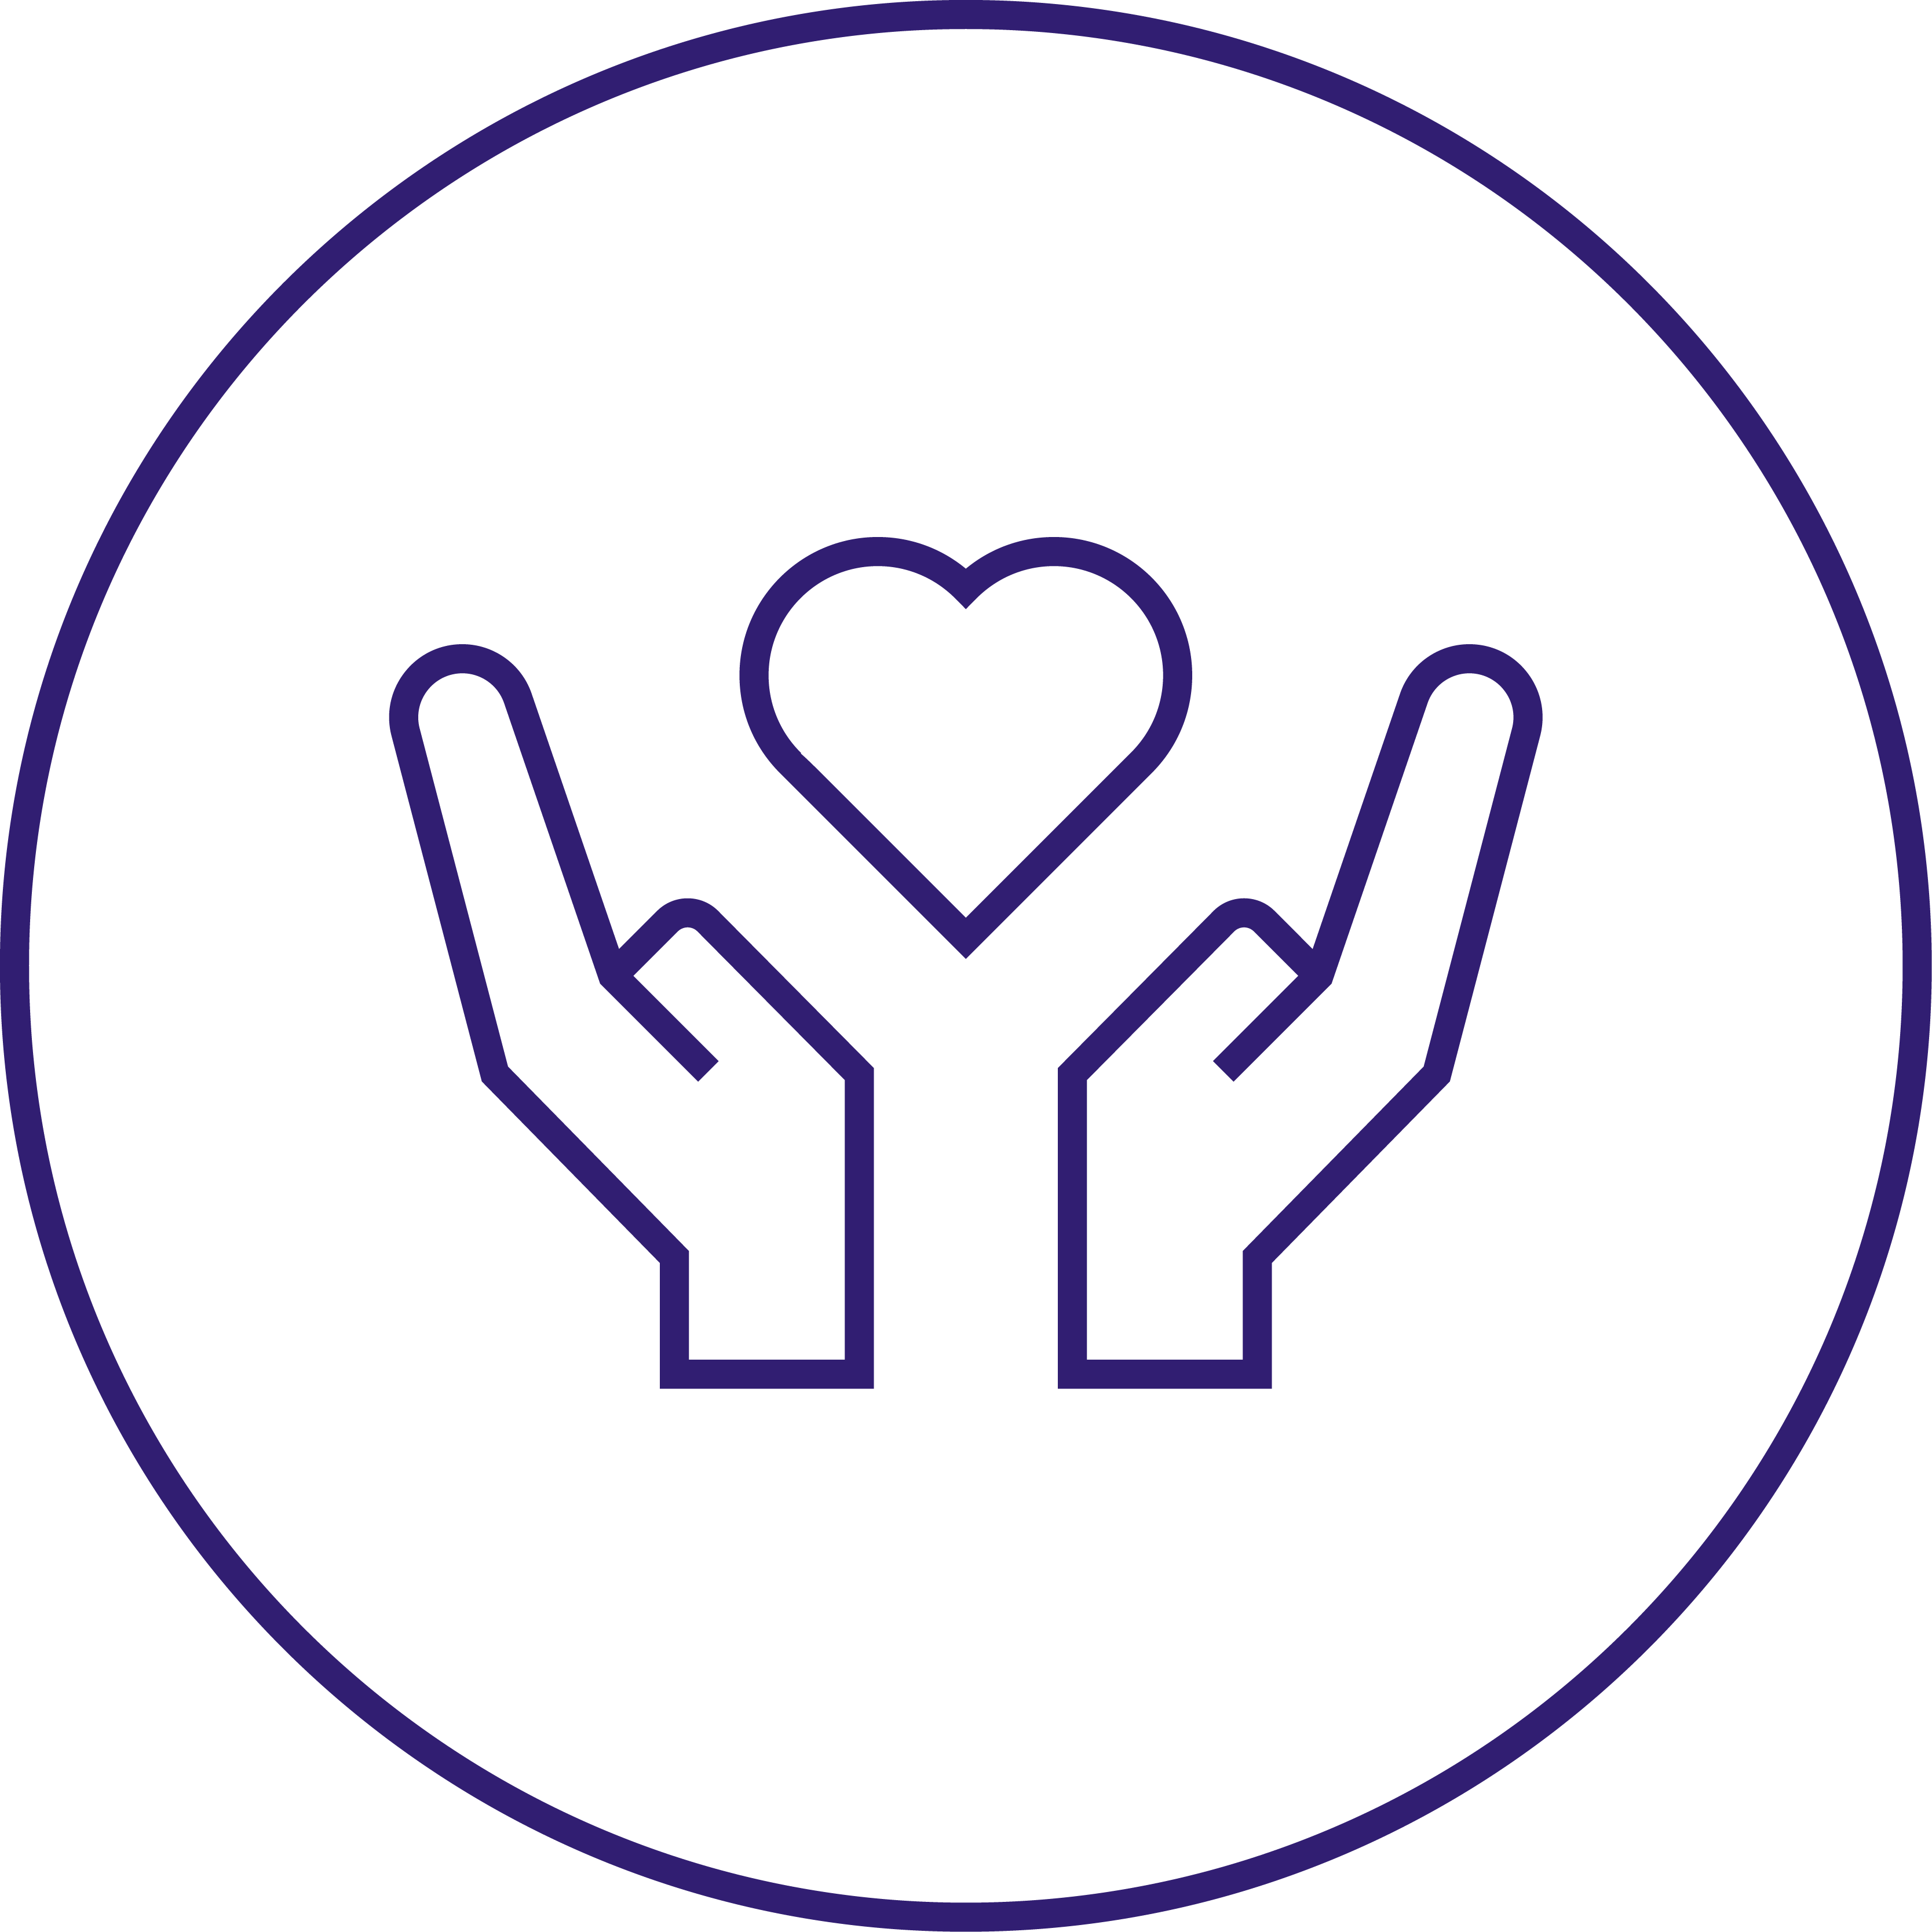 icon containing two hands holding a heart inside a purple circle